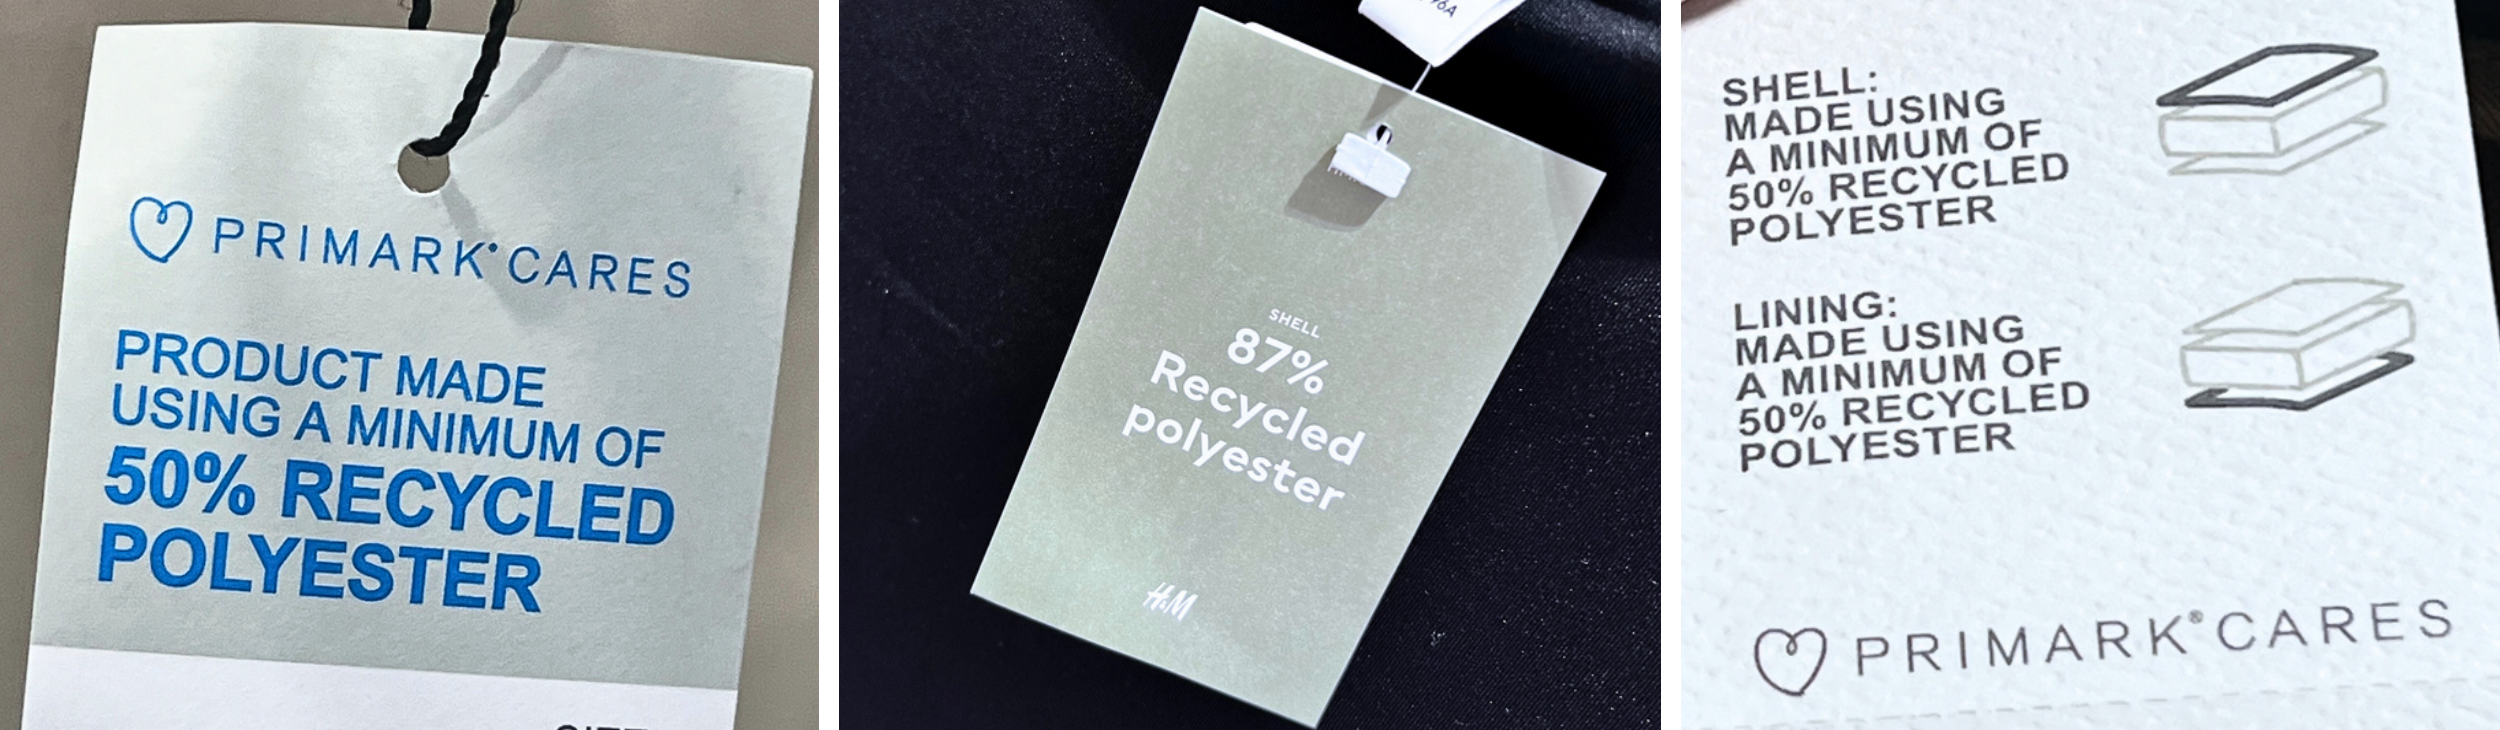 Primark and H&M greenwashed recycled polyester tags